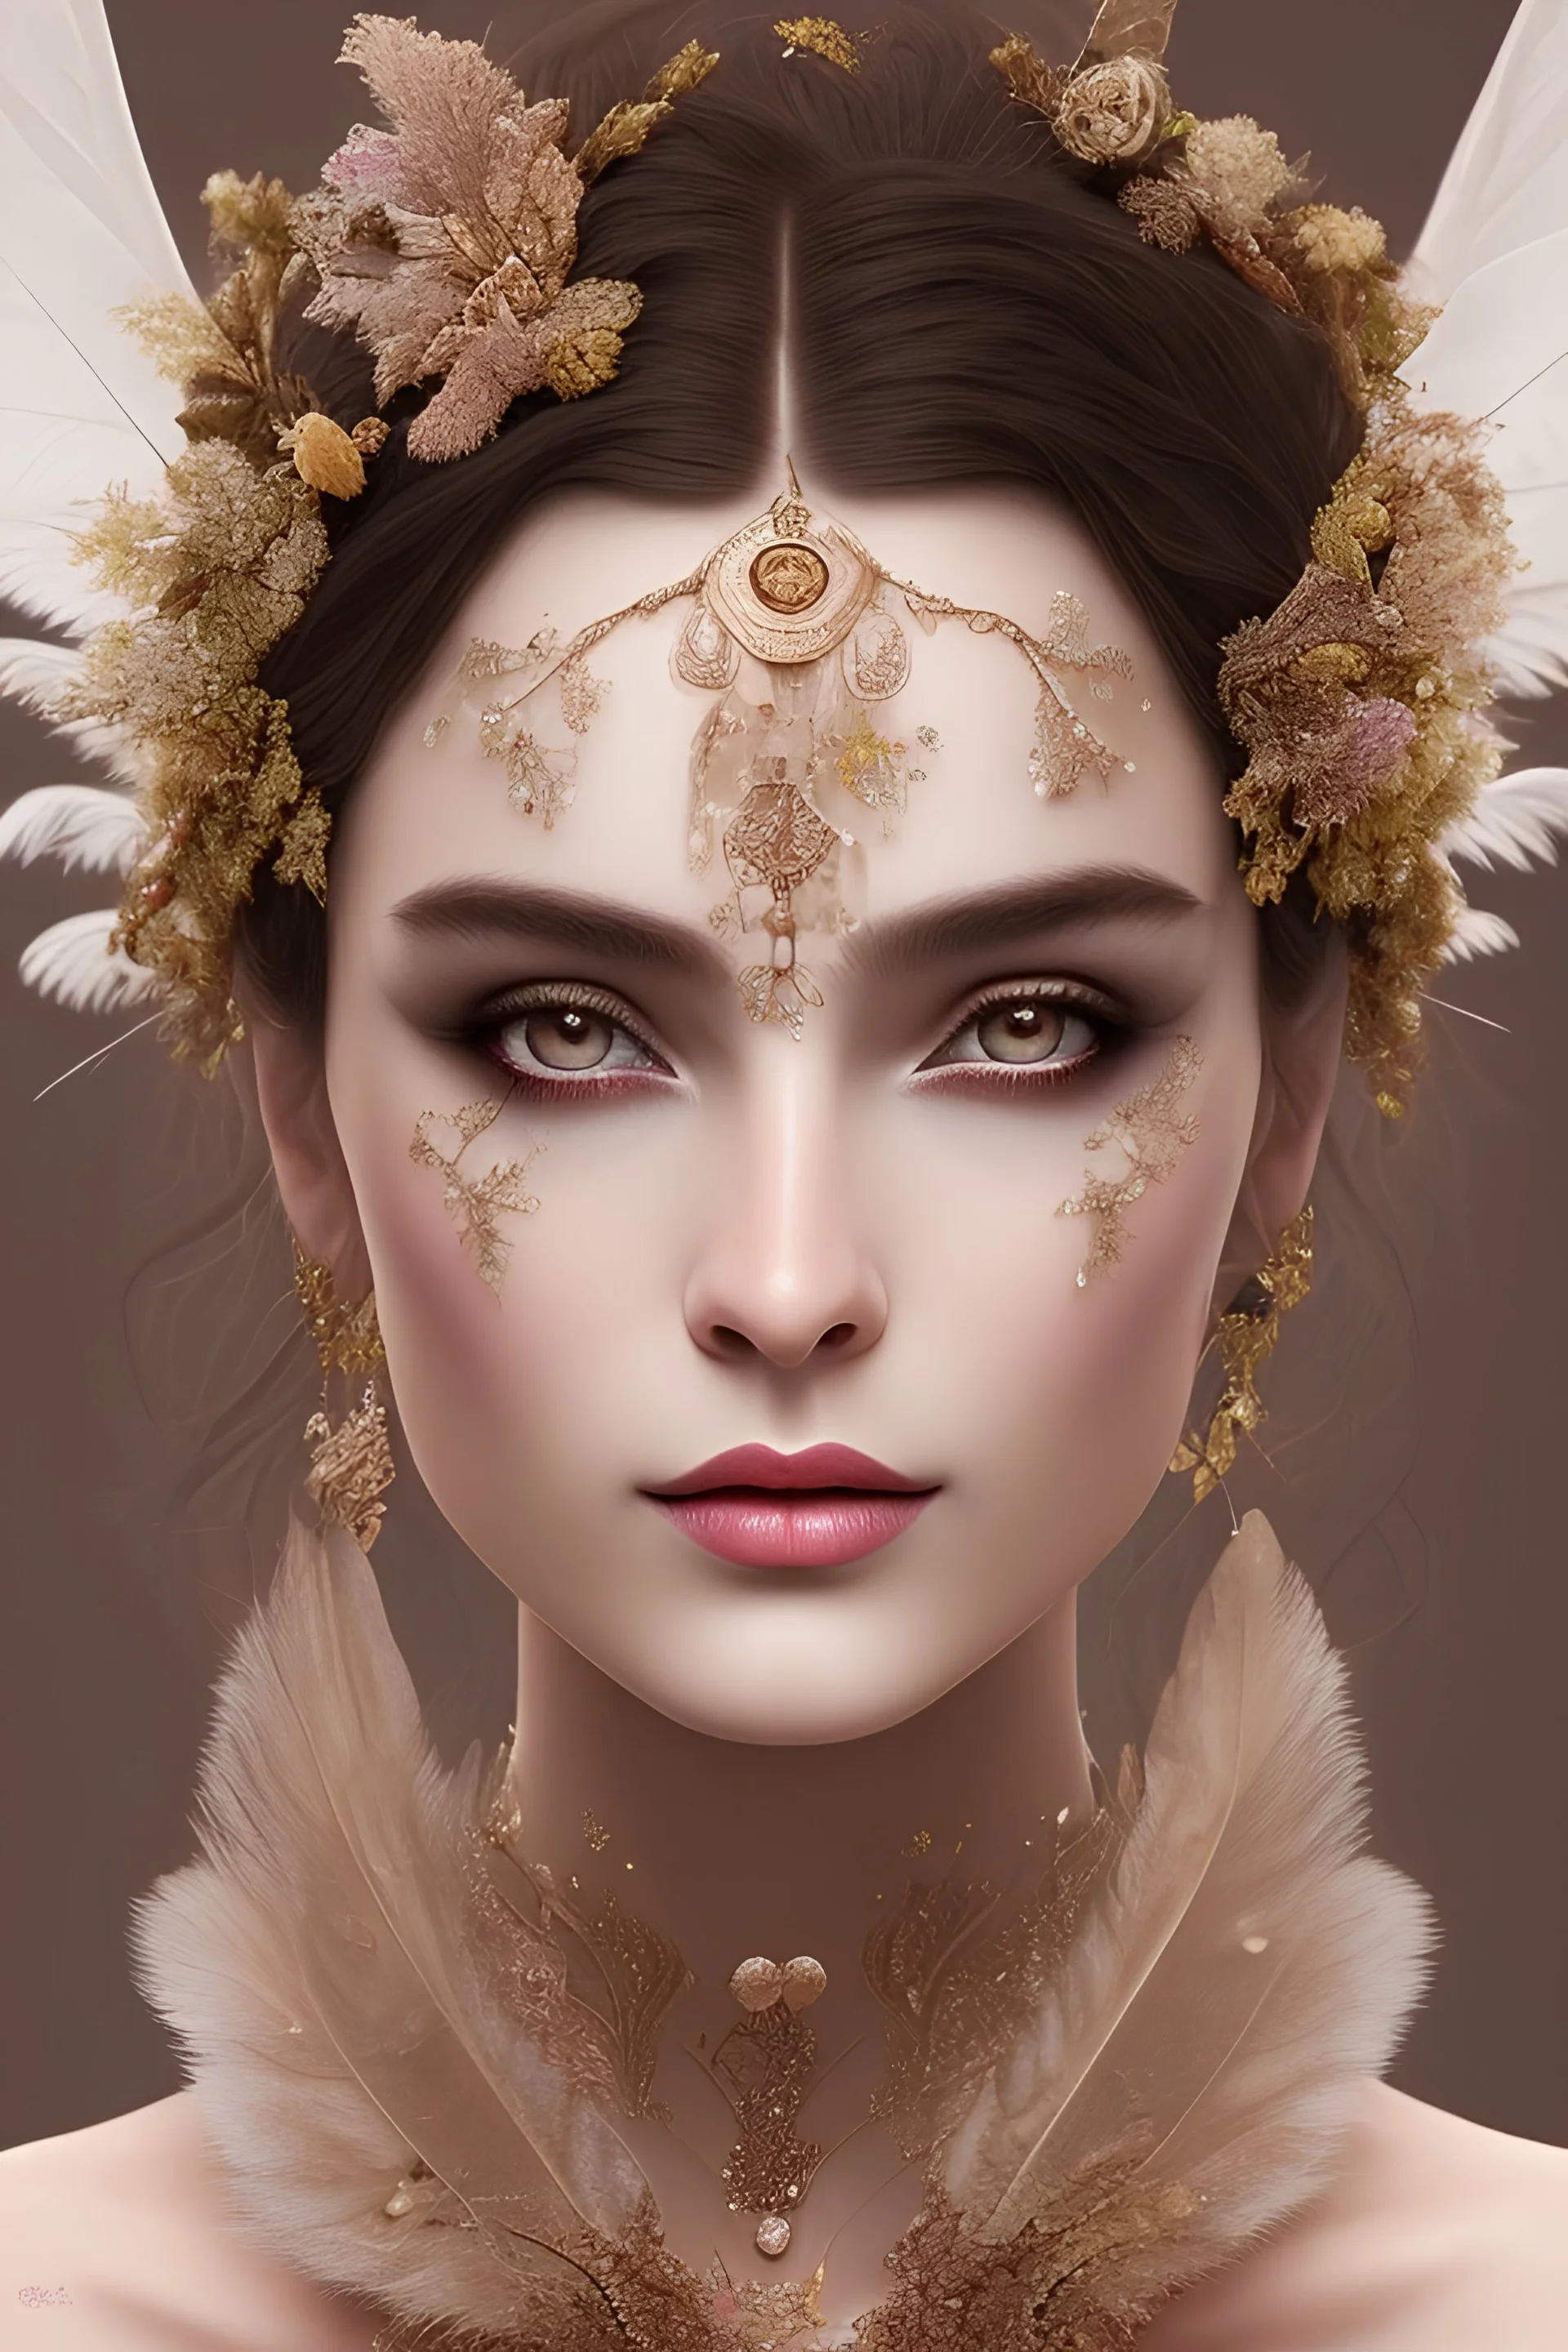 woolitize, frida, rusty metal, feathers, Dryad, fae, sidhe, ominous, nature, plants, wildflower, facepaint, dnd character portrait, intricate, oil on canvas, masterpiece, expert, insanely detailed, 4k resolution, retroanime style, cute big circular reflective eyes, cinematic smooth, intricate detail , soft smooth lighting, soft pastel colors, painted Renaissance style